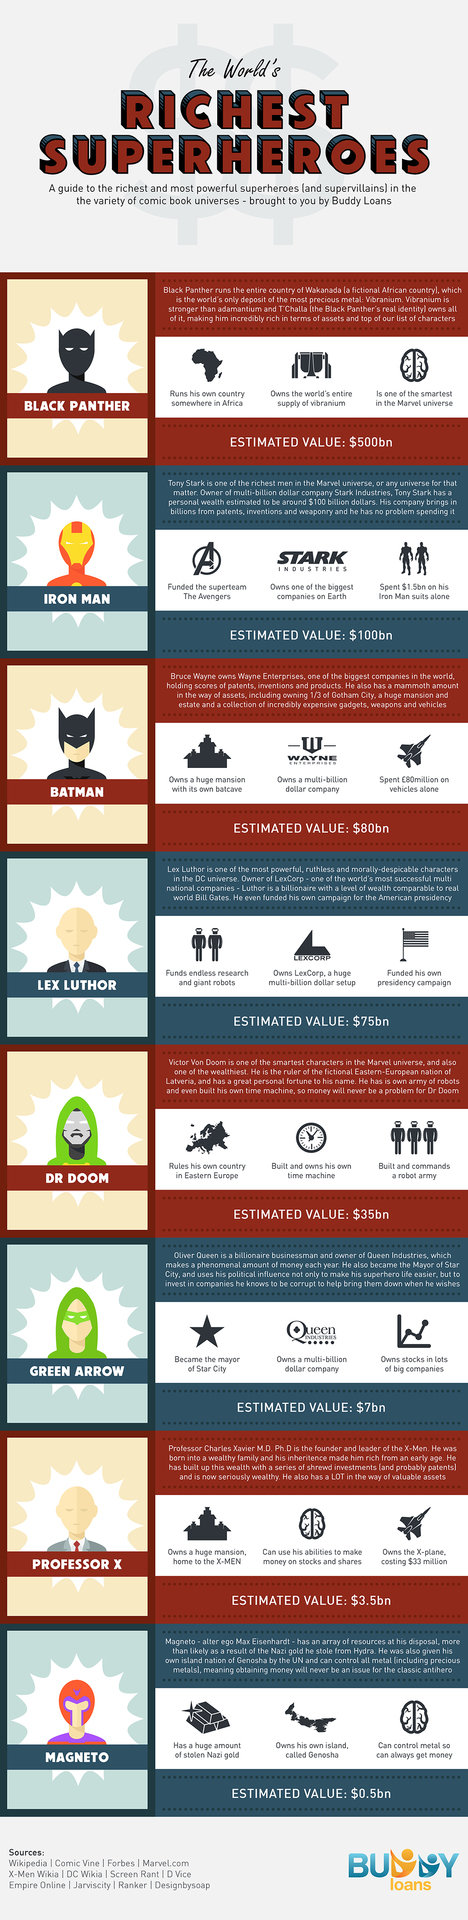 he World’s Richest Superheroes (Infographic)